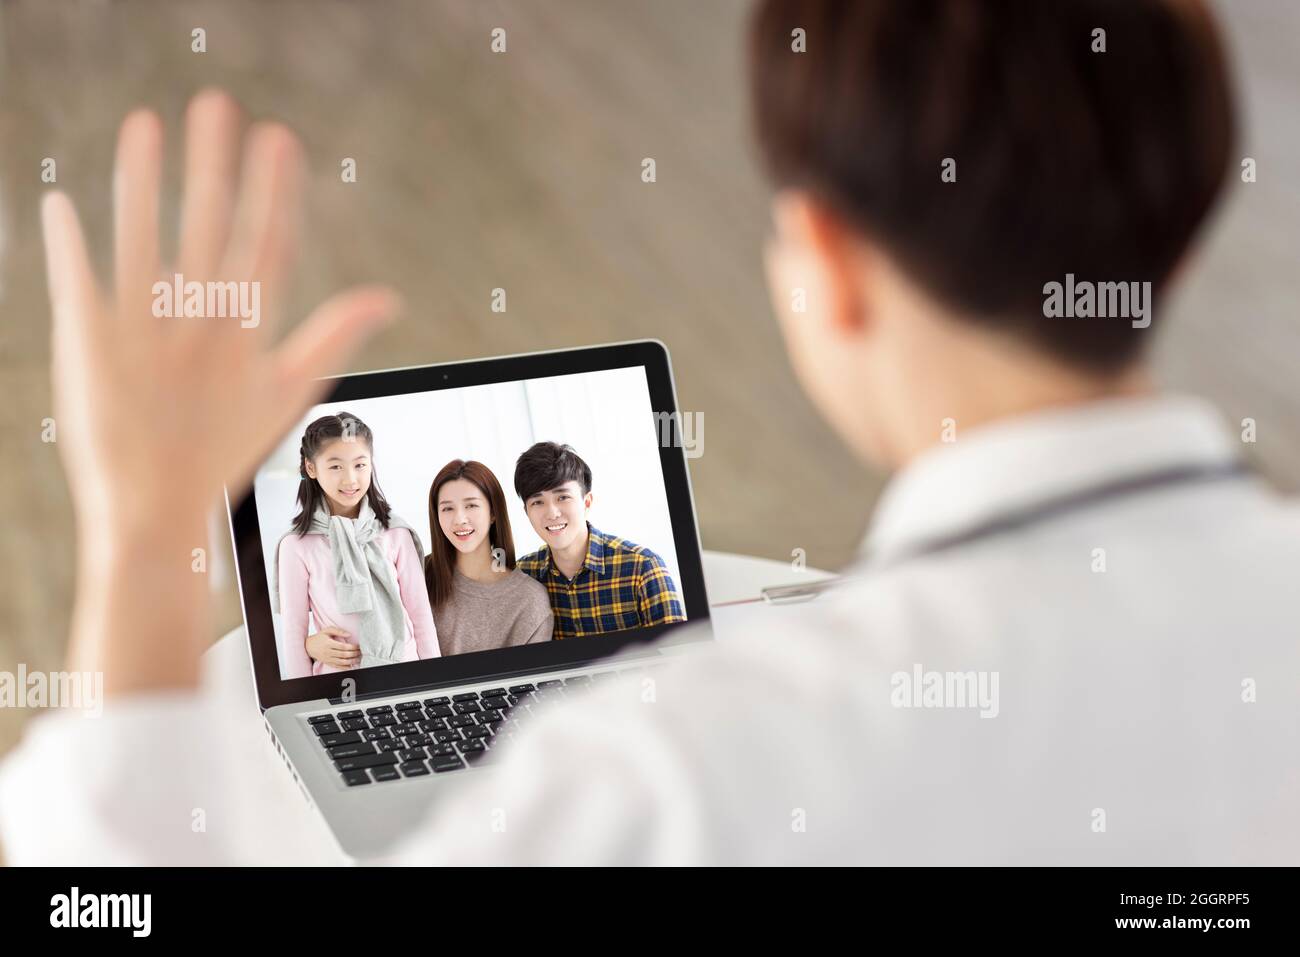 Man having video chat with friends and family using laptop.Family meet their doctor by video call. Stock Photo